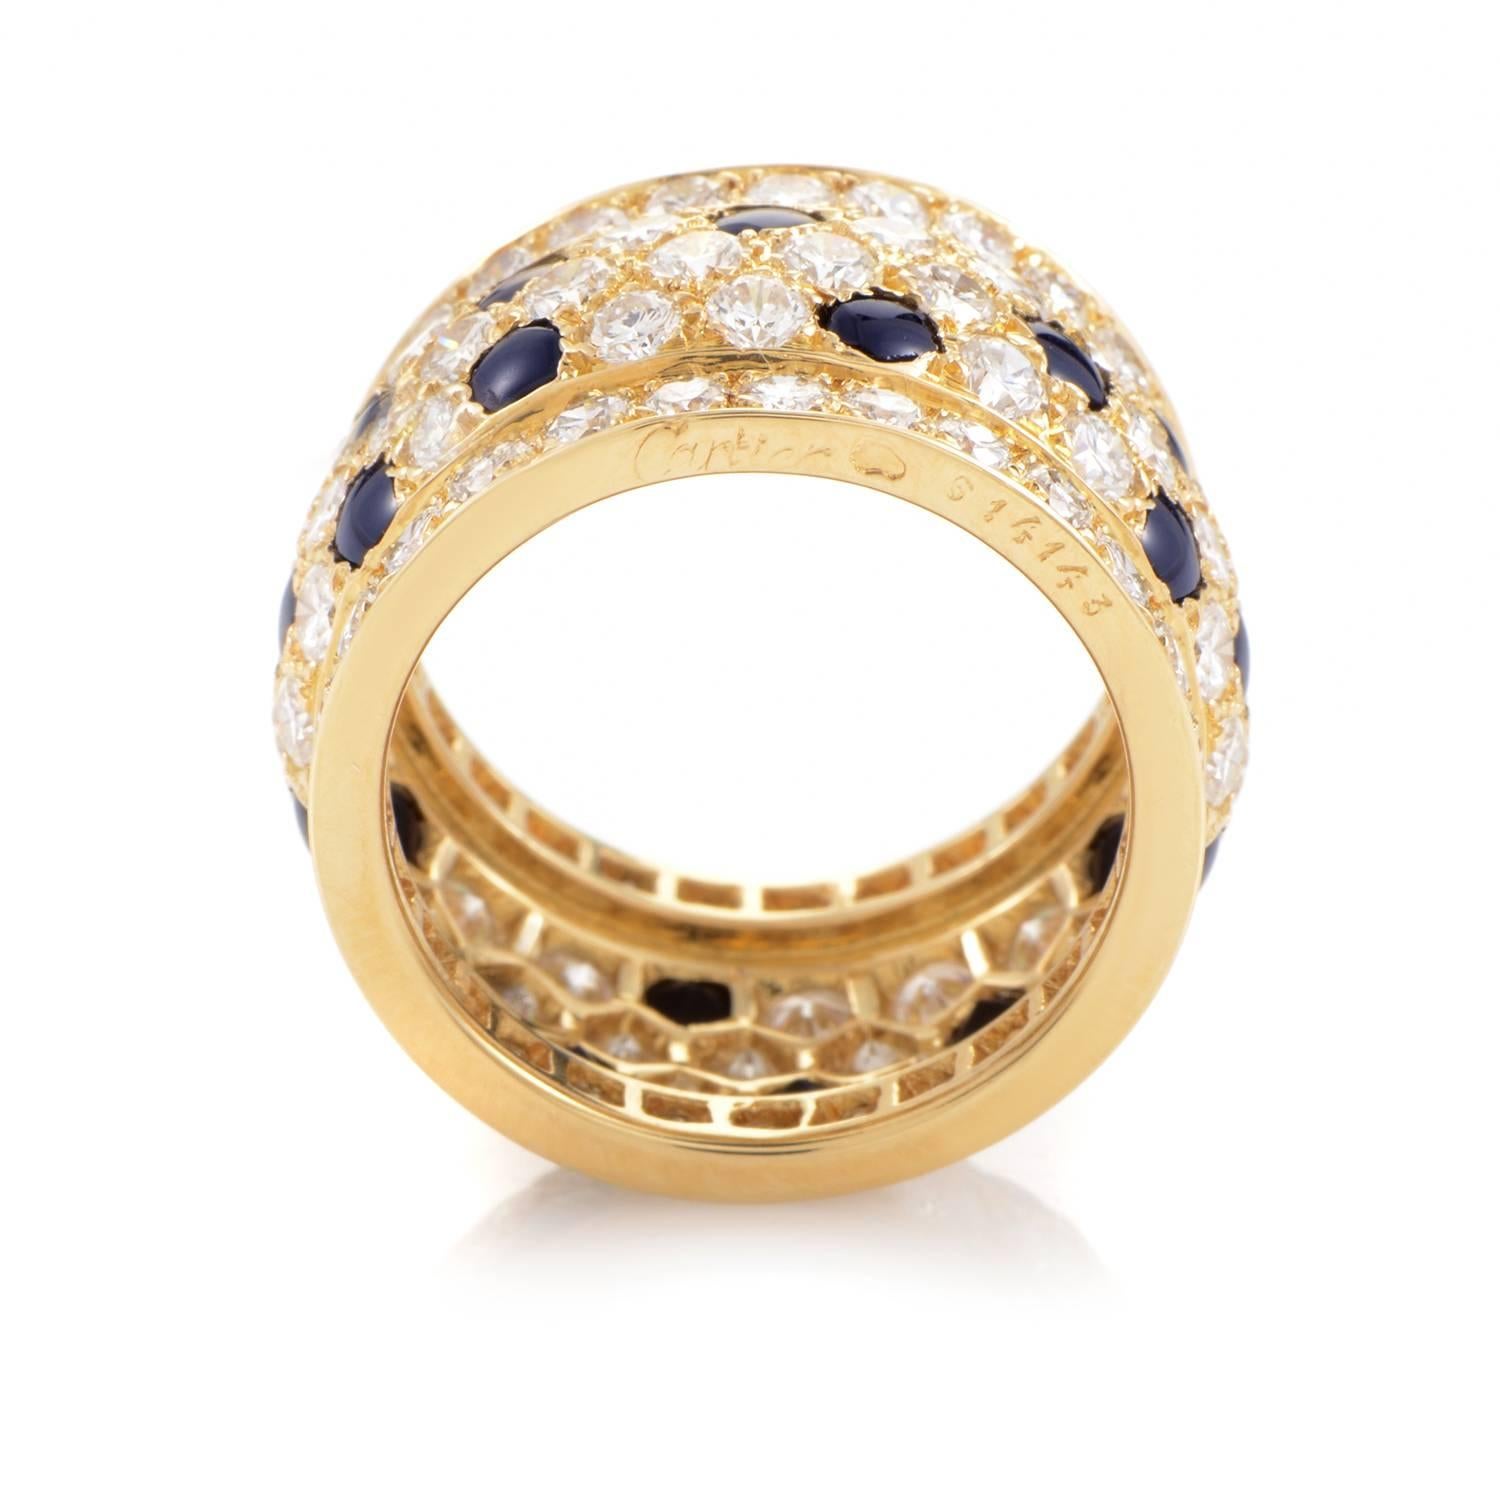 Onyx joins the opulent dance in this ring design from Cartier. A grand span of 18K yellow gold takes a meticulous turn, as onyx mingle with a dazzling swath of 5.00ct of diamonds. This luxurious display of master craftsmanship is punctuated by the